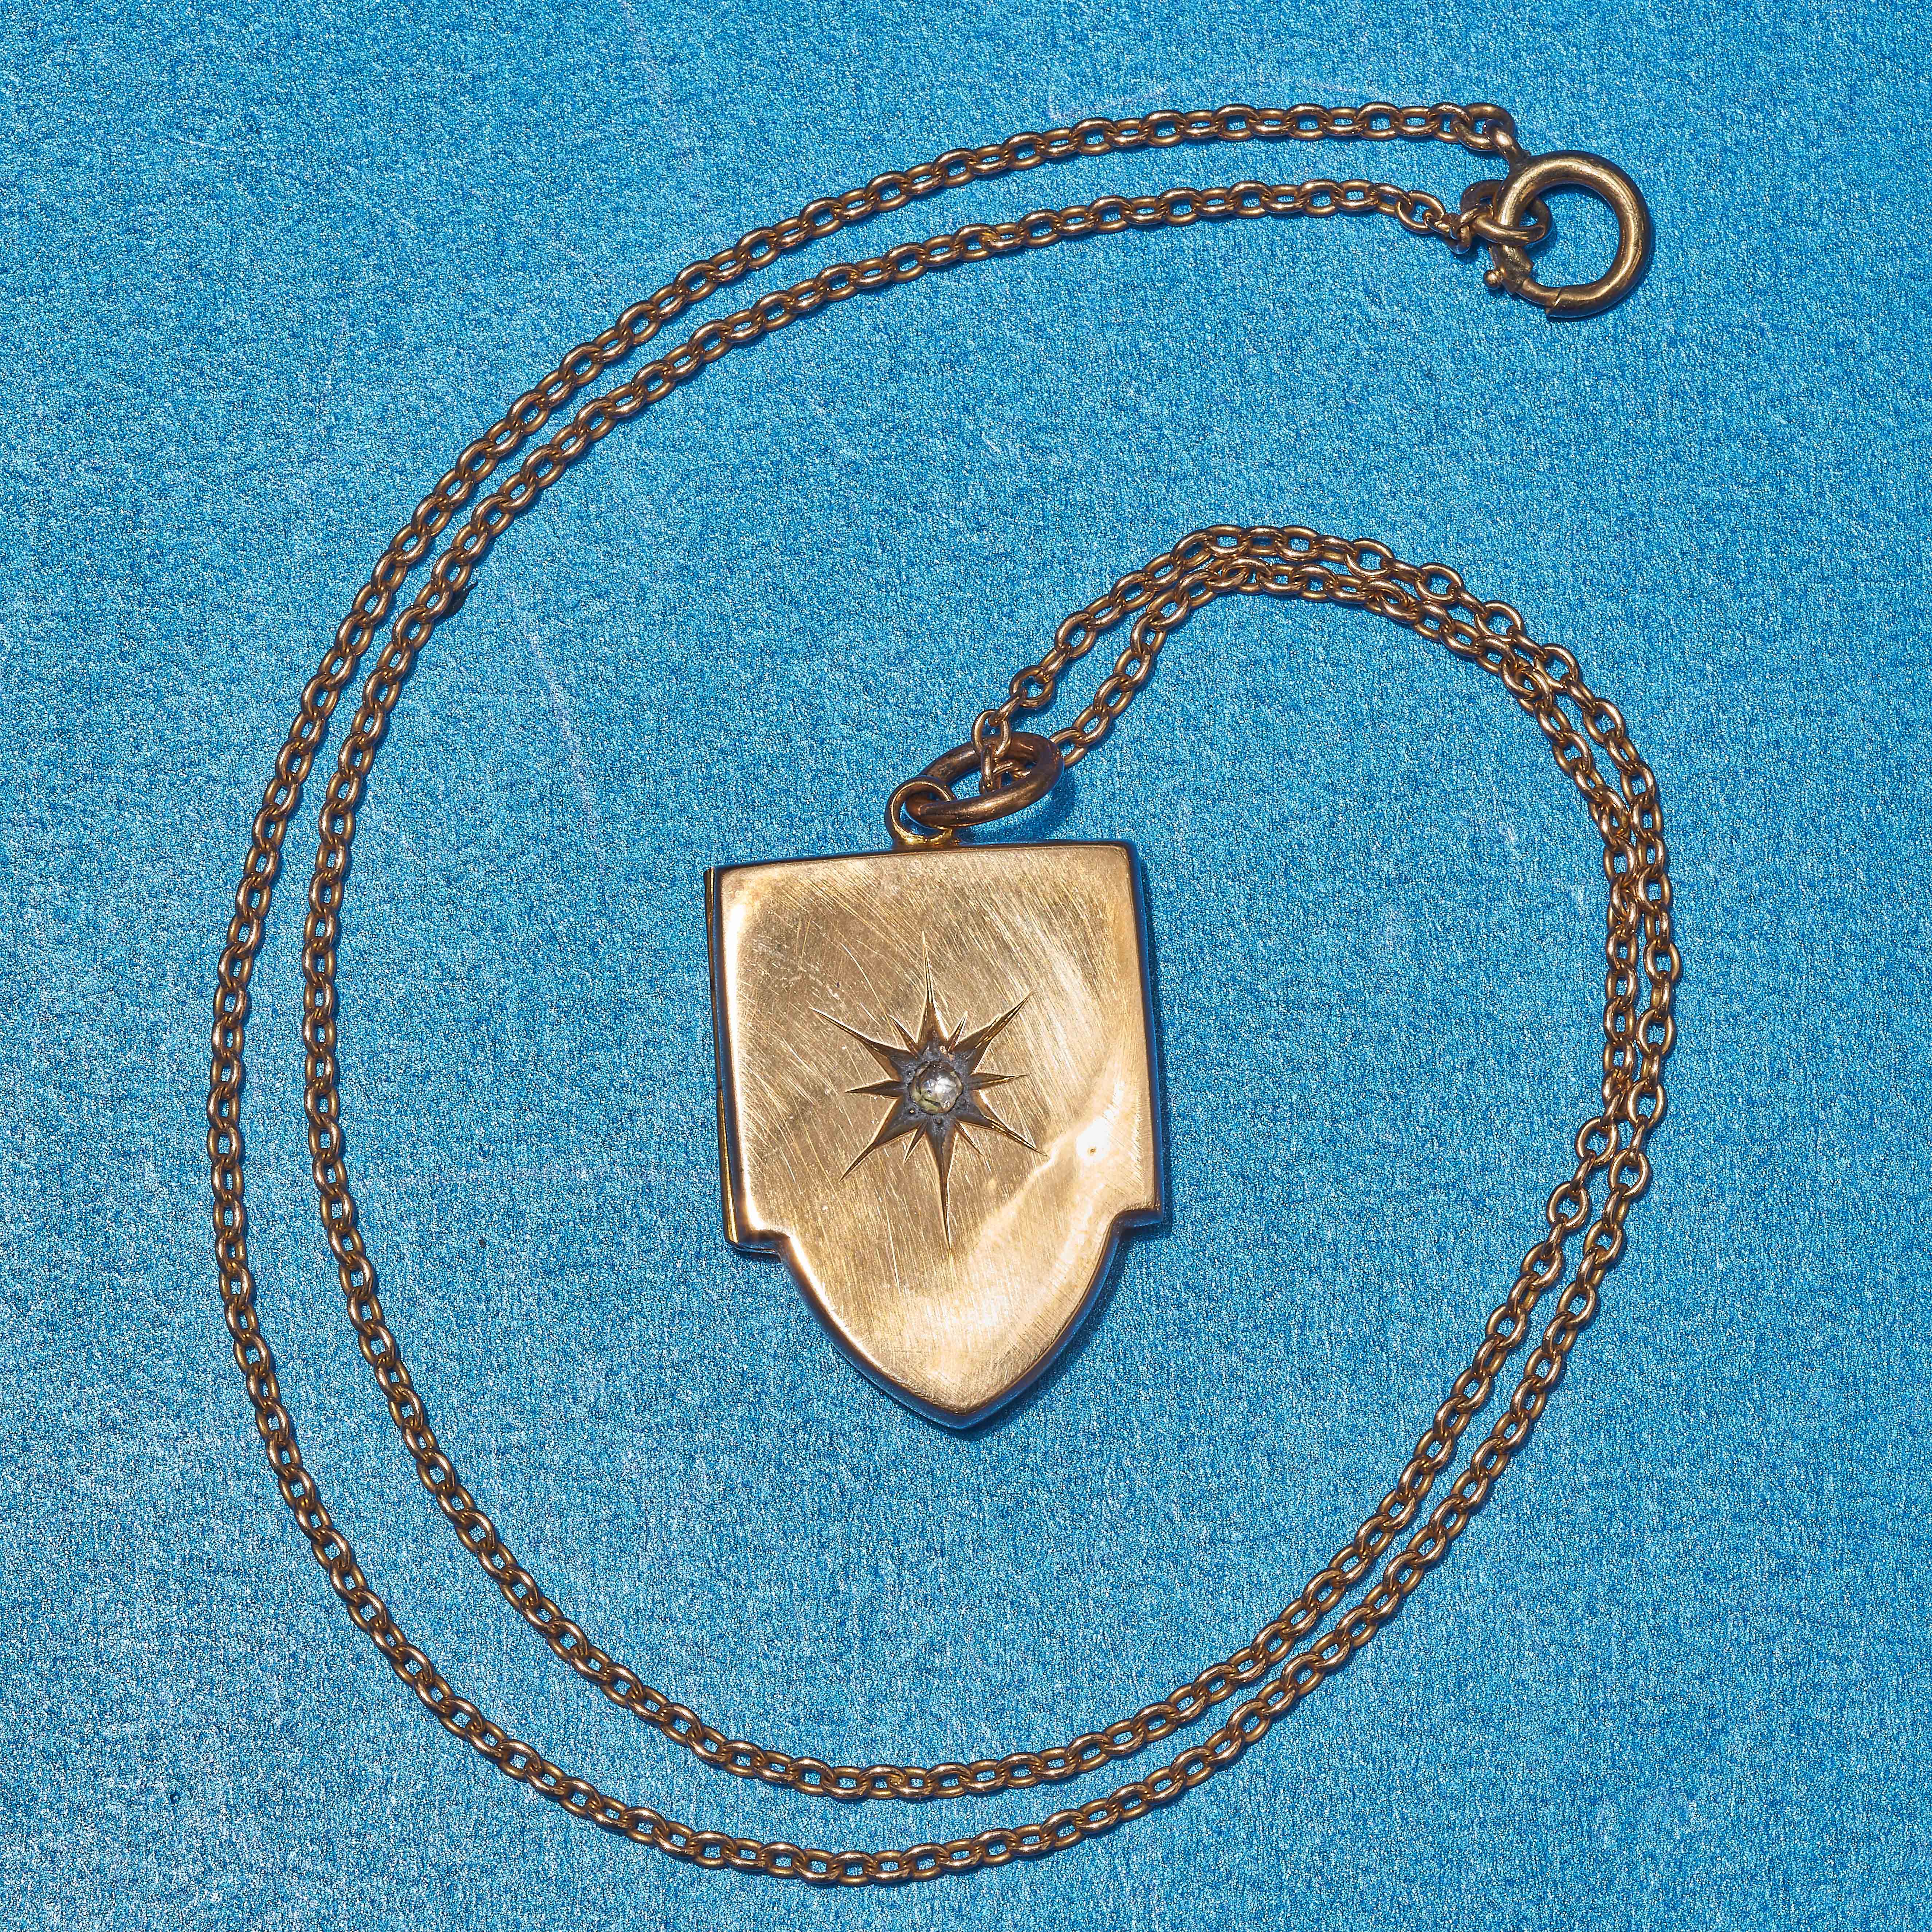 ANTIQUE DIAMOND LOCKET PENDANT WITH GOLD CHAIN - Image 2 of 2